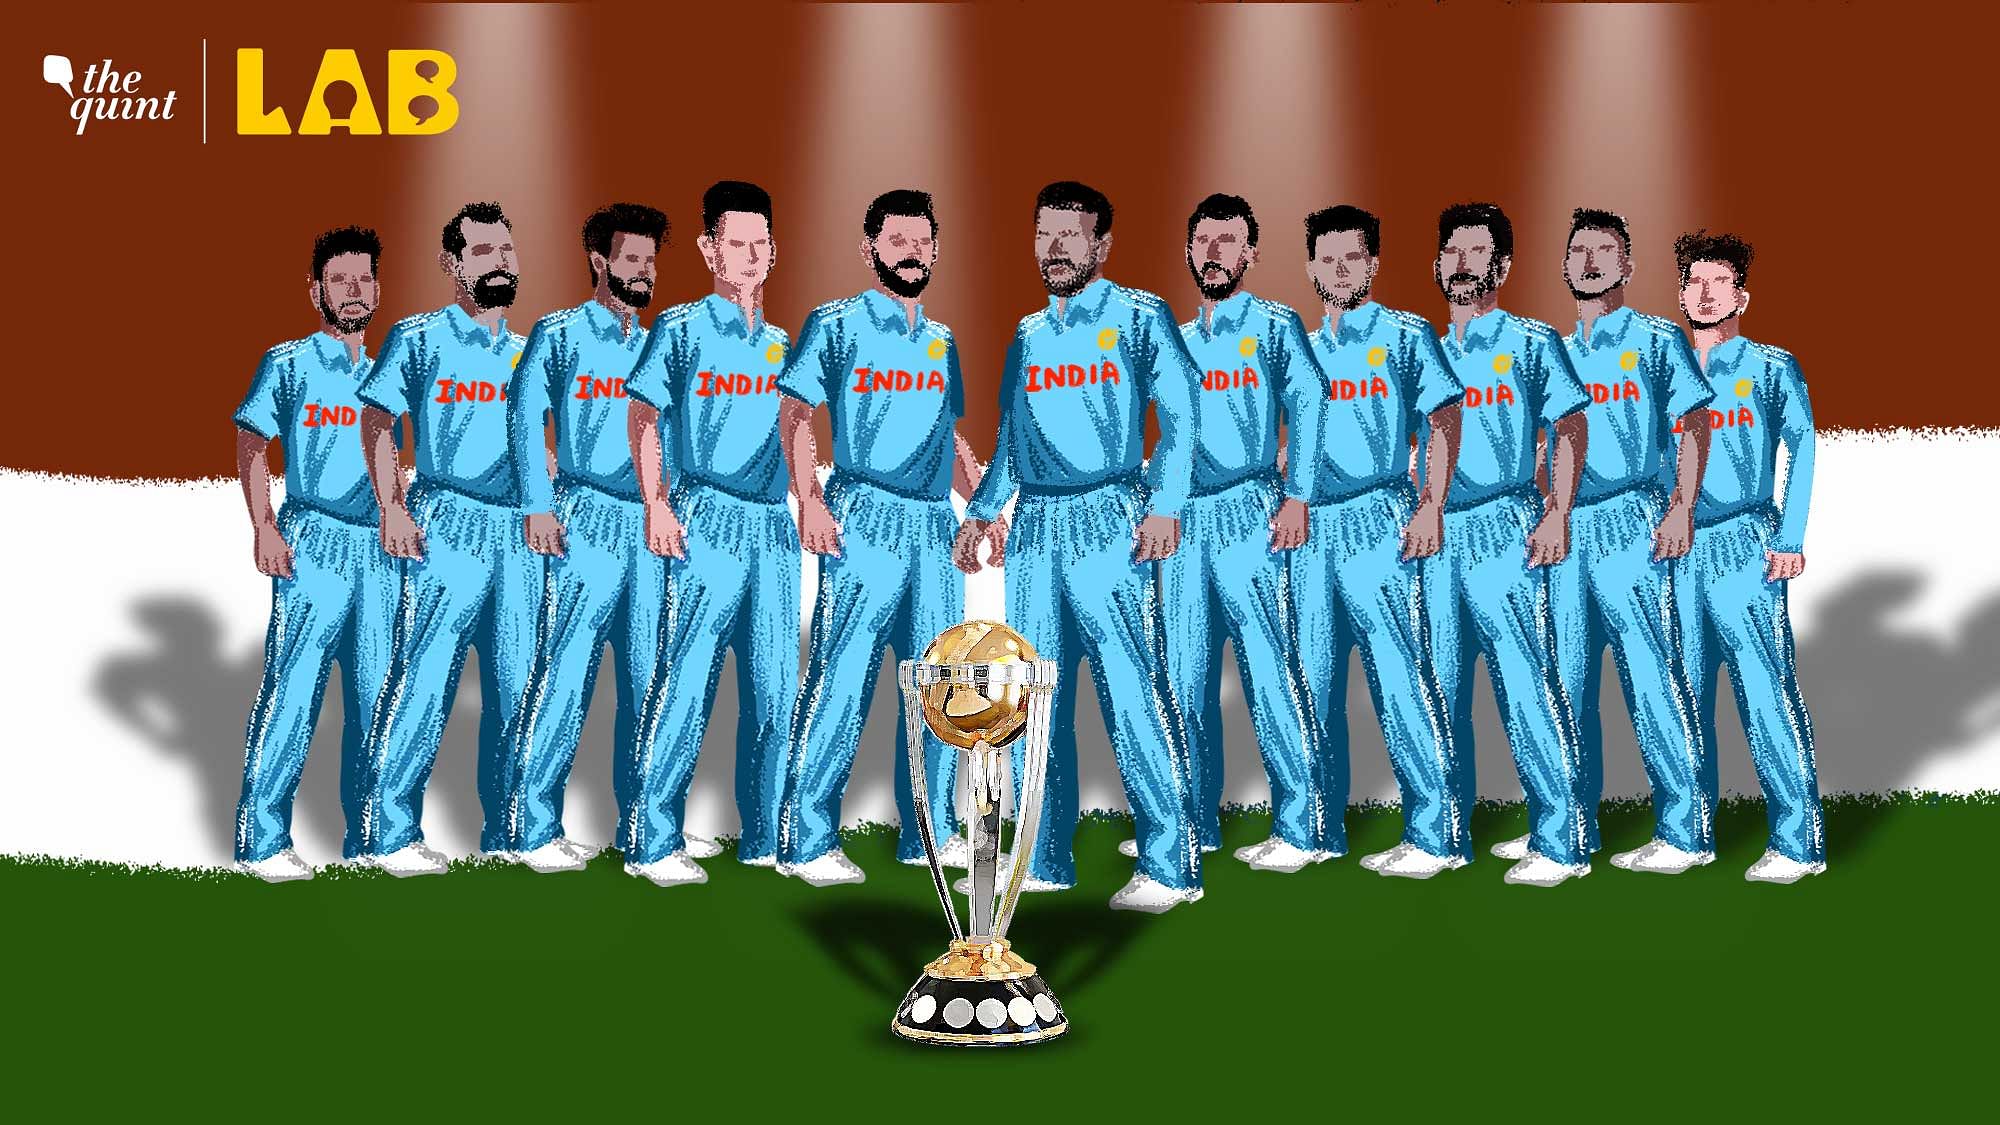 <div class="paragraphs"><p>This is the story of <a href="https://www.thequint.com/sports/world-cup/not-good-enough-we-tried-but-it-wasnt-supposed-to-be-rohit-on-indias-loss">Rohit Sharma</a>’s Super 16, who won’t need any trophies to be called legends.</p></div>